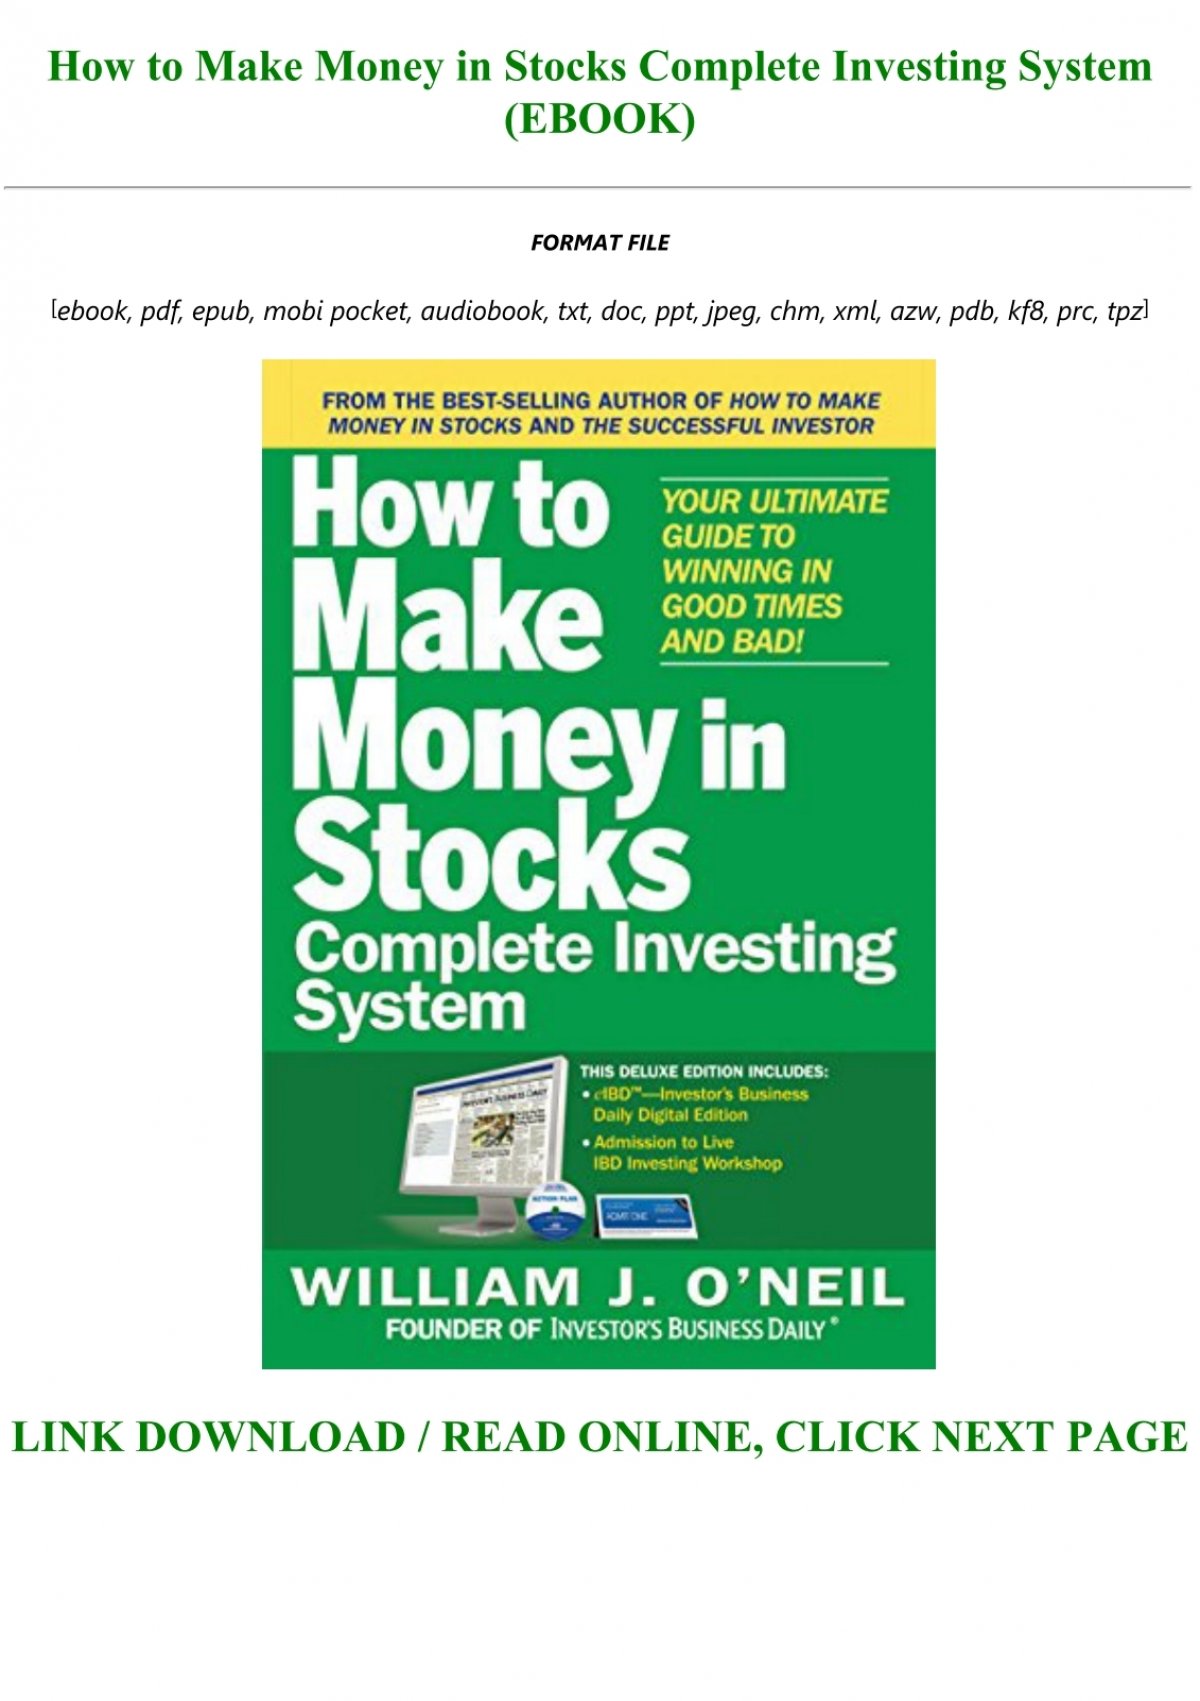 investing in stocks vs starting a business - Money|Stocks|Stock|System|Book|Market|Trading|Books|Guide|Times|Day|Der|Download|Investors|Edition|Investor|Description|Pdf|Format|Epub|O'neil|Die|Strategies|Strategy|Mit|Investing|Dummies|Risk|Gains|Business|Man|Investment|Years|World|Wie|Action|Charts|William|Dad|Plan|Good Times|Stock Market|Ultimate Guide|Mobi Format|Full Book|Day Trading|National Bestseller|Successful Investing|Rich Dad|Seven-Step Process|Maximizing Gains|Major Study|American Association|Individual Investors|Mutual Funds|Book Description|Download Book Description|Handbuch Des|Stock Market Winners|12-Year Study|Leading Investment Strategies|Top-Performing Strategy|System-You Get|Easy Steps|Daily Resource|Big Winners|Market Rally|Big Losses|Market Downturn|Canslim Method